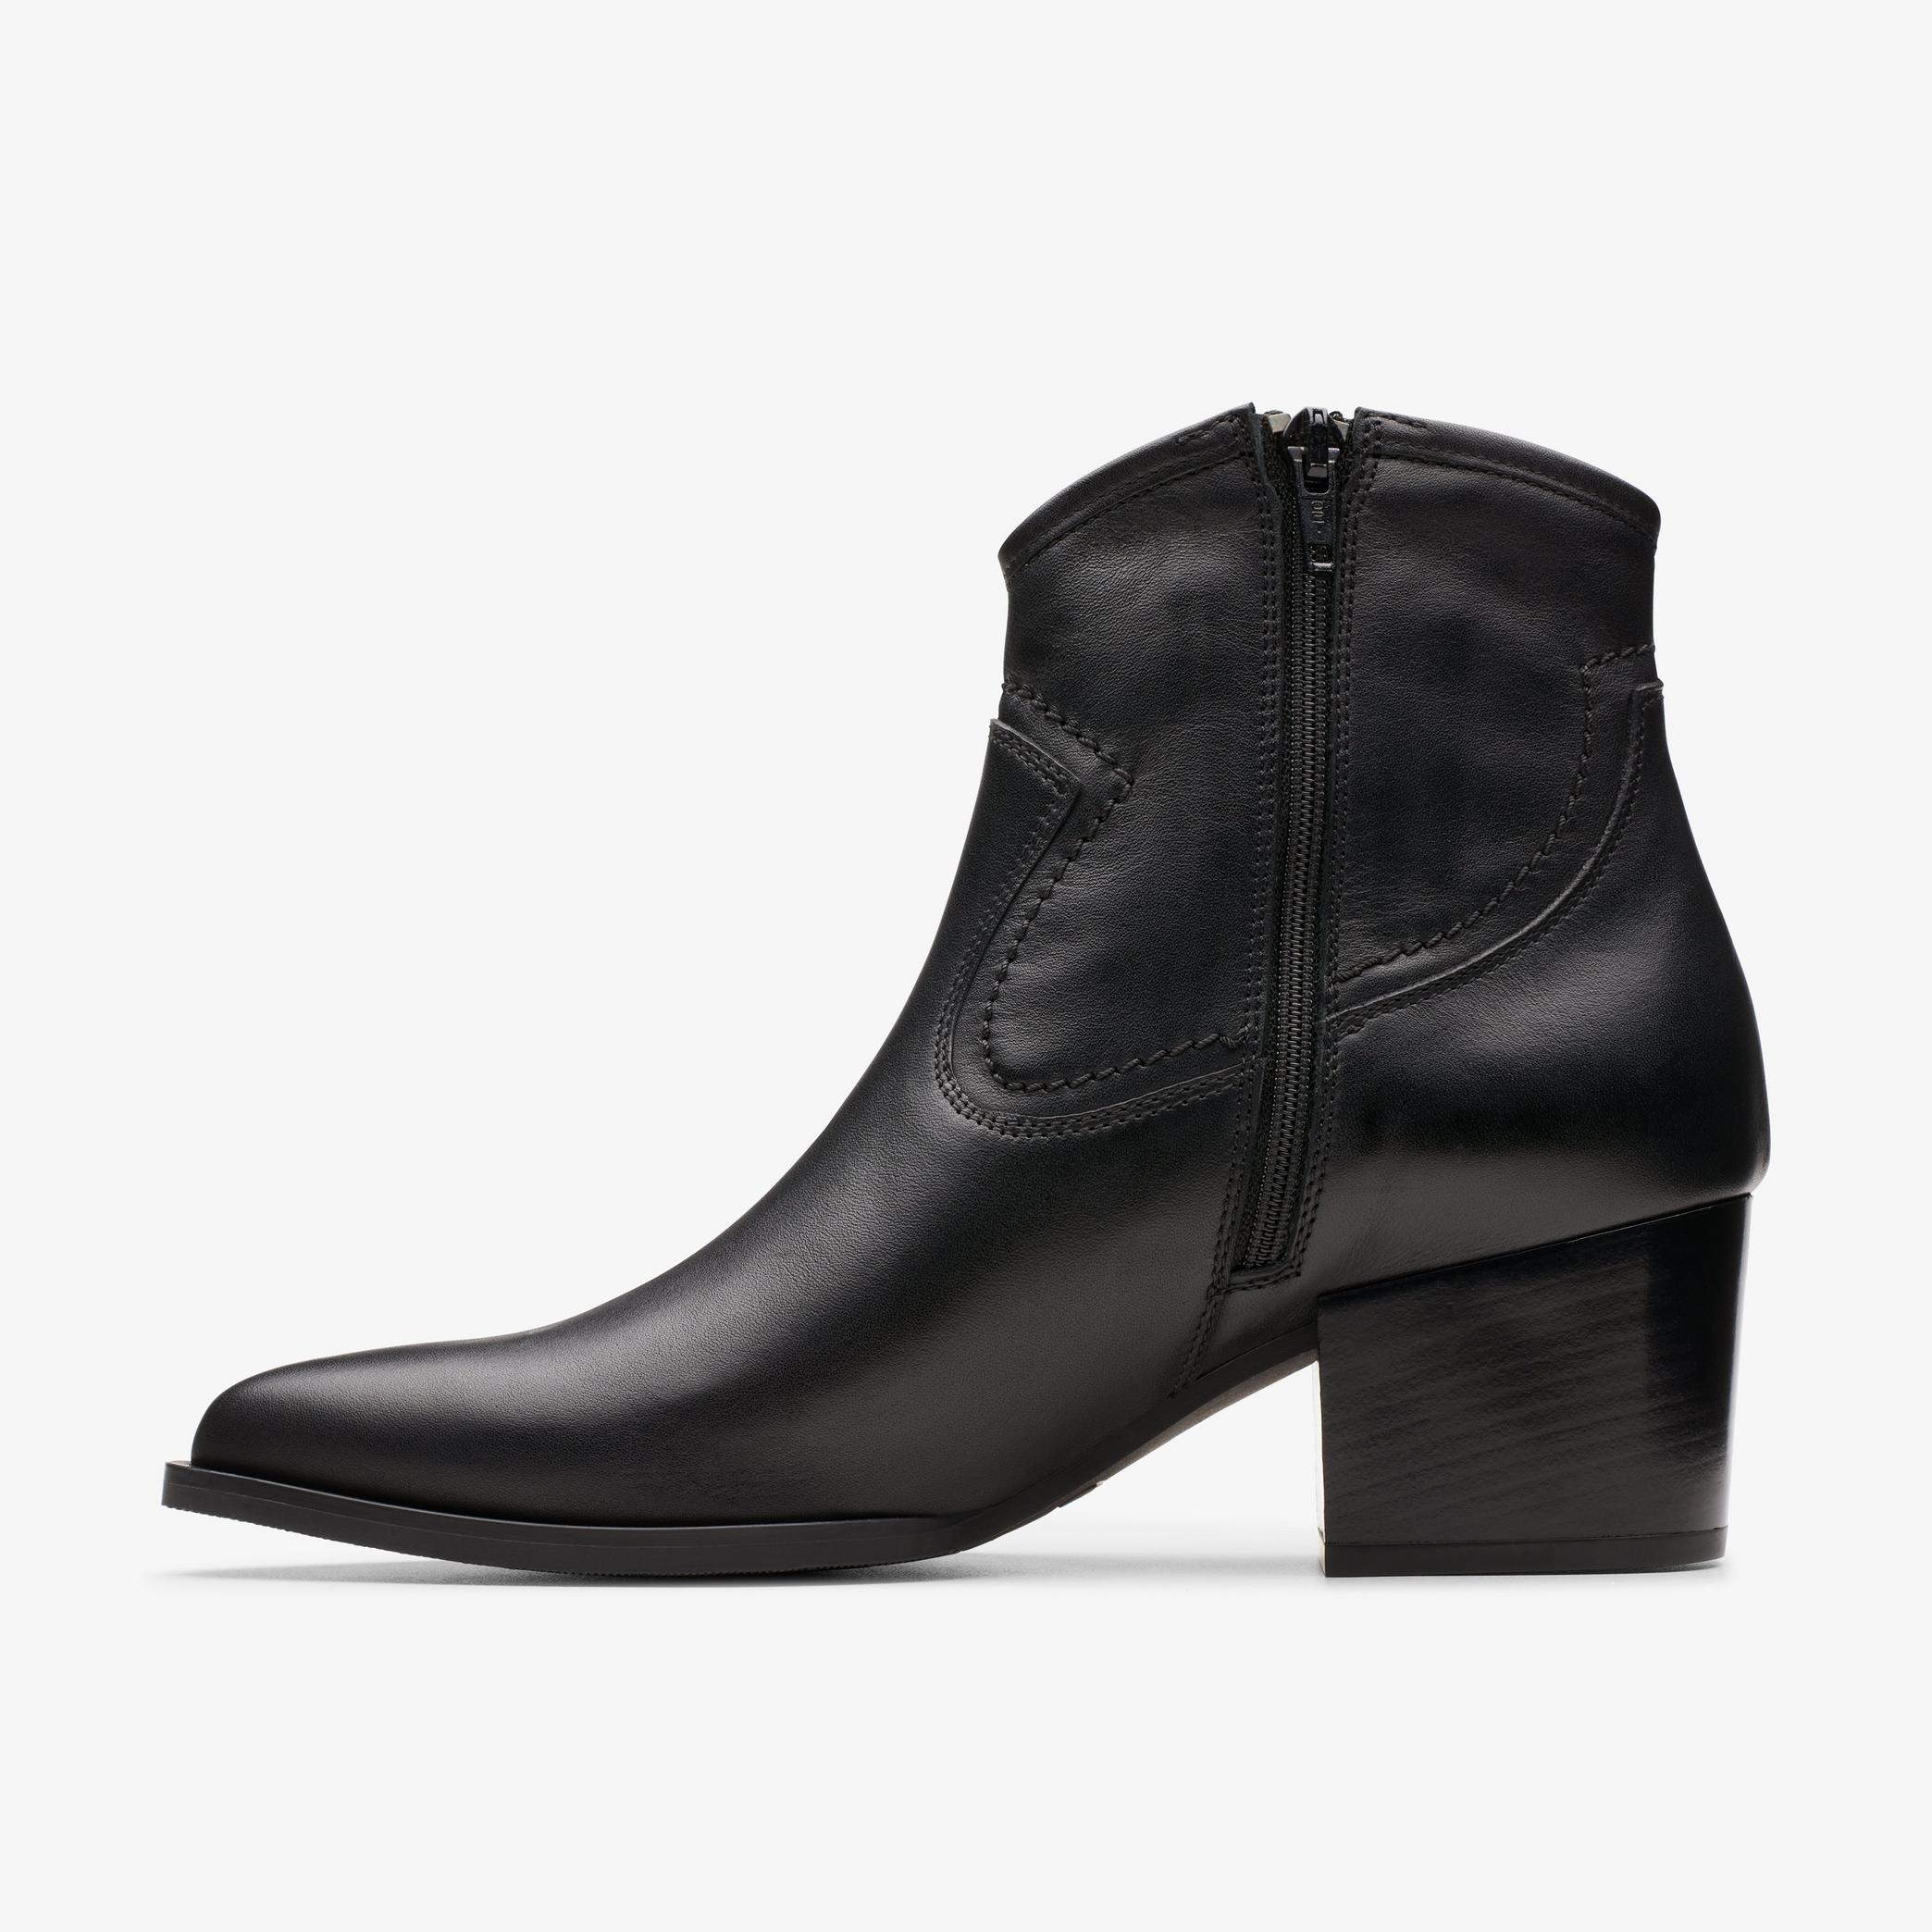 Elder Rae Black Ankle Boots, view 2 of 6